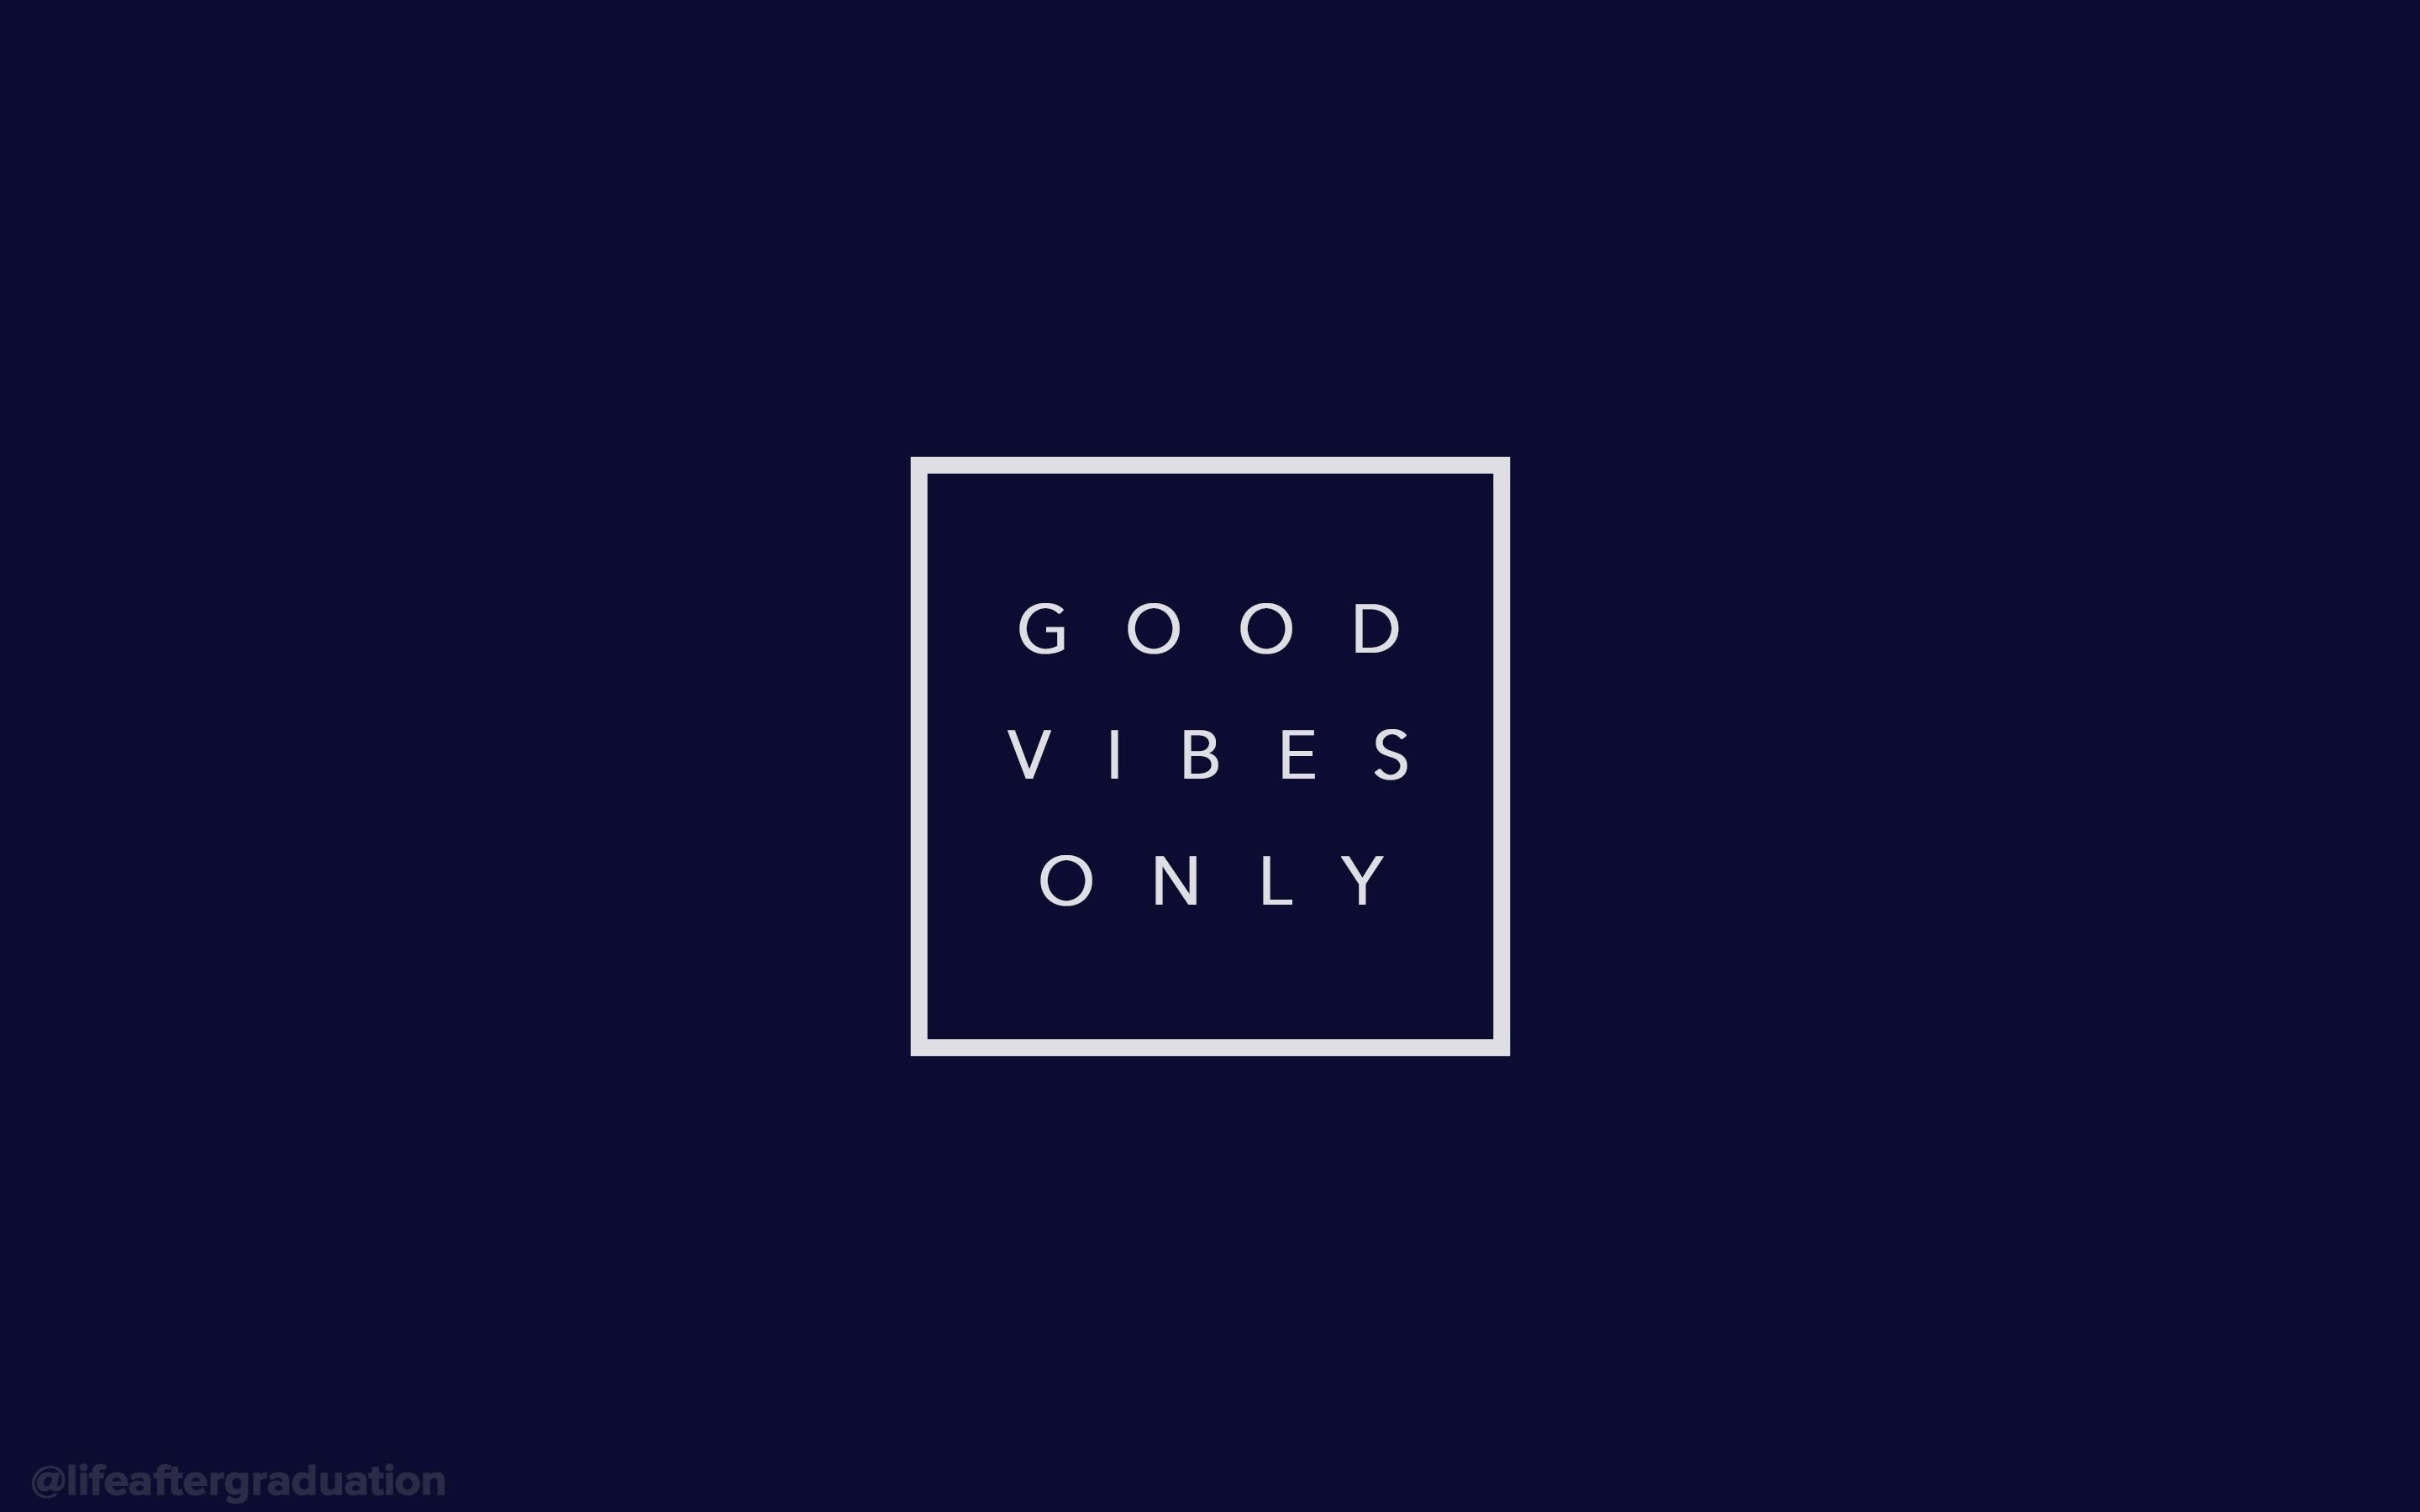 Positive Vibes Background. Good Vibes